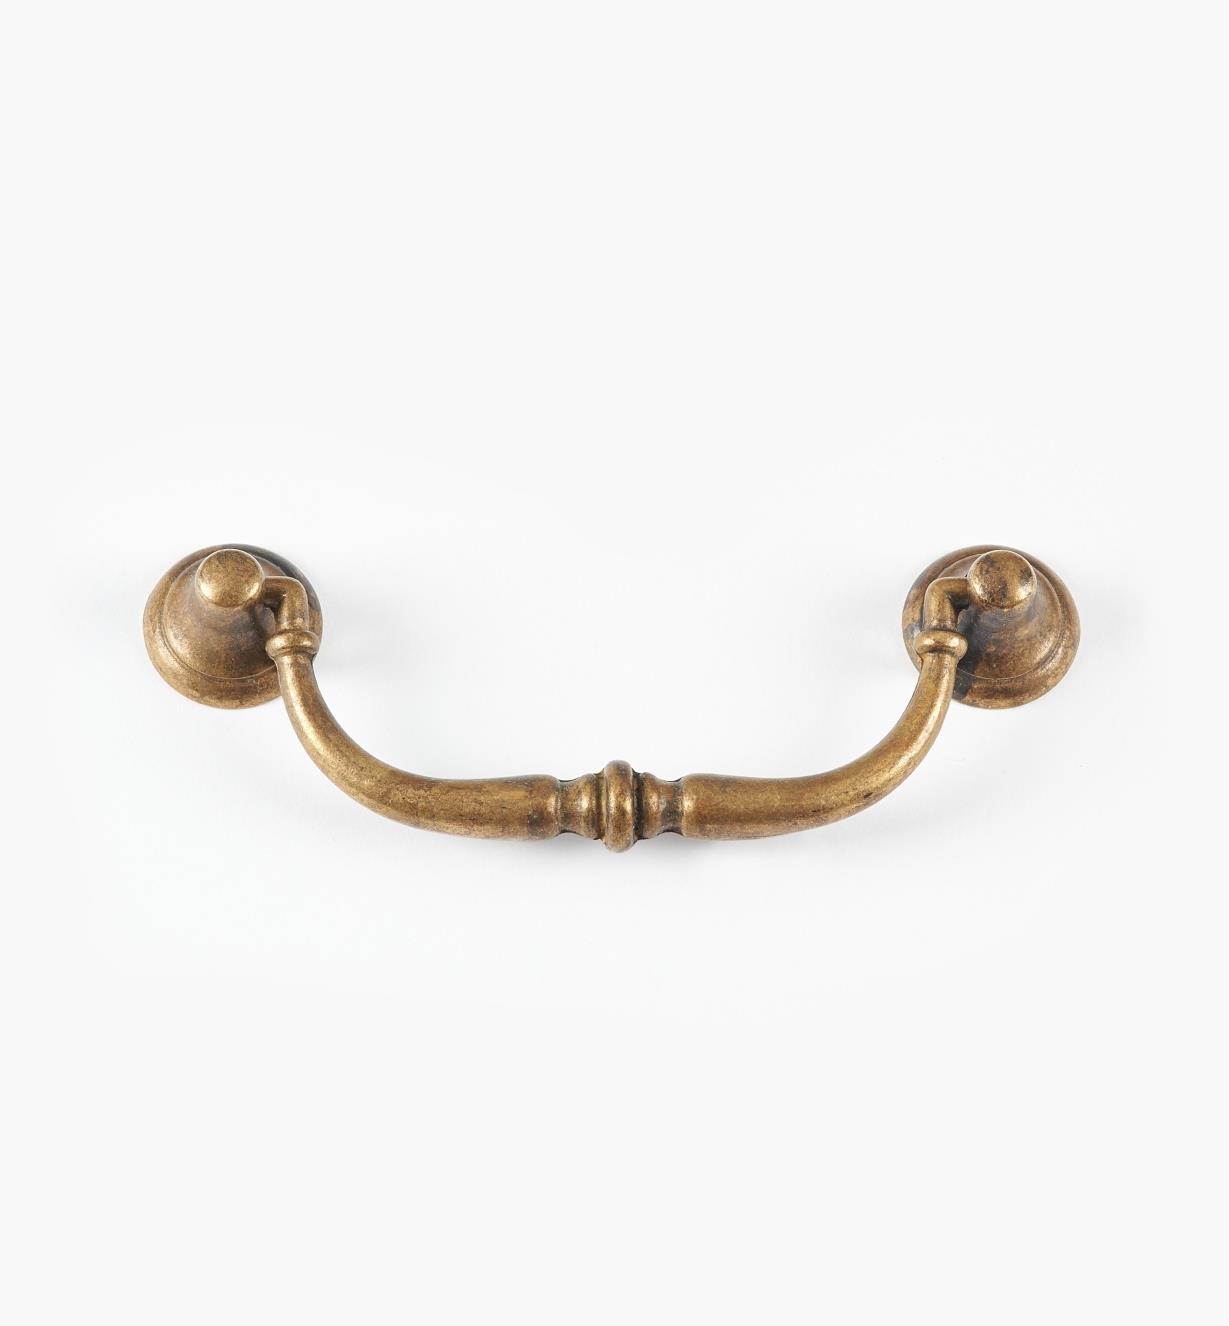 01A3922 - 96mm Old Brass Stop Handle